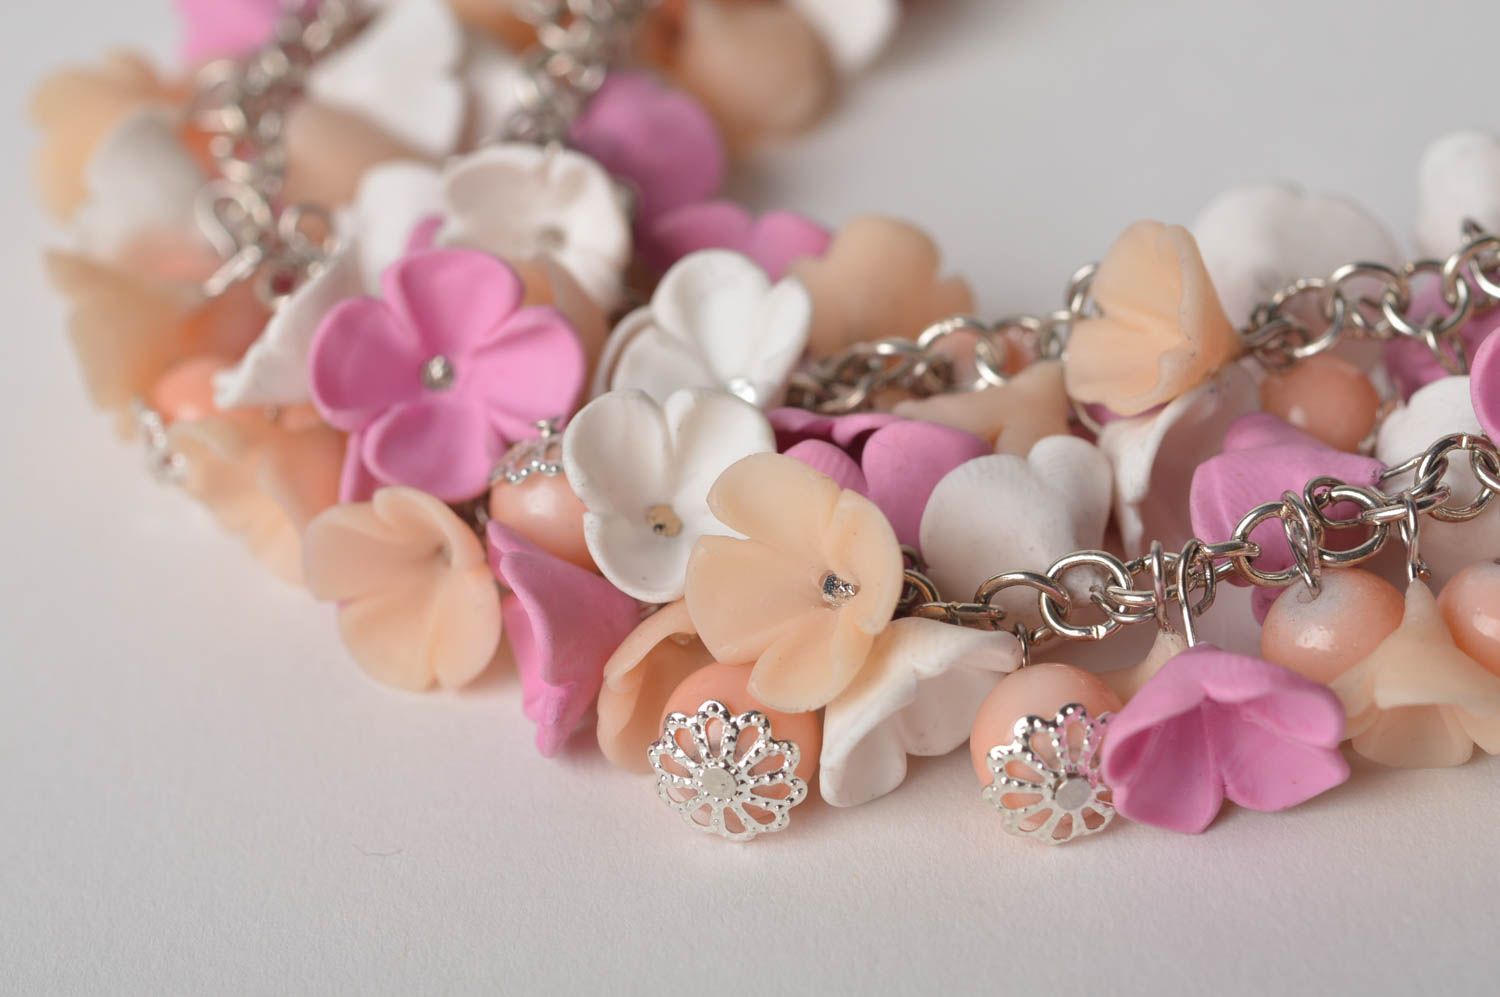 Stylish handmade plastic necklace flower necklace designs accessories for girls photo 4